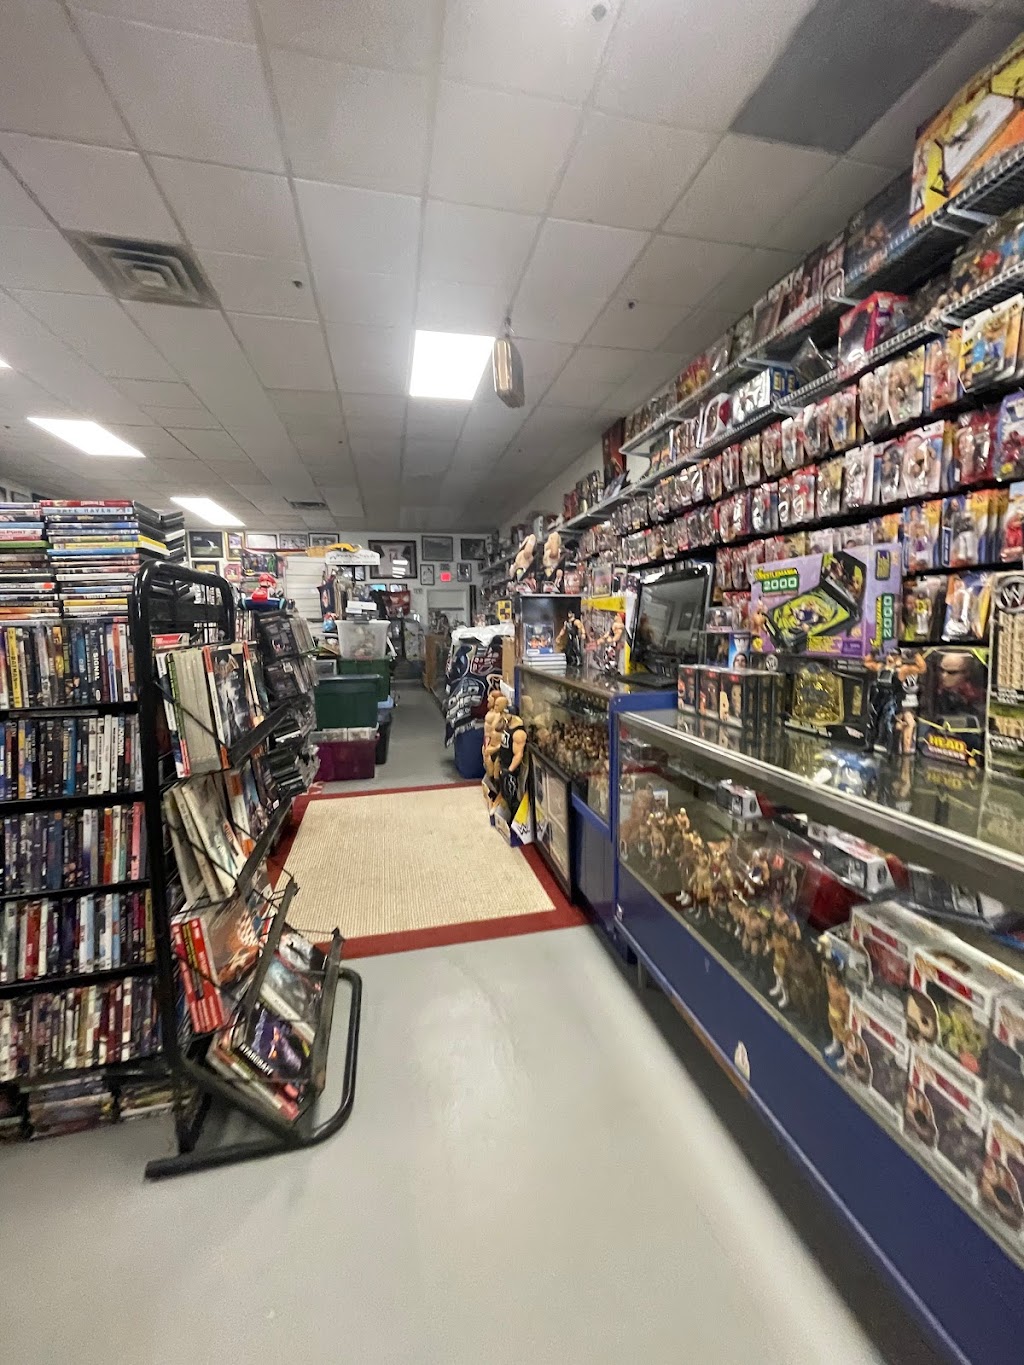 M & J Video Games & Collectibles | 847 Queen St, Southington, CT 06489 | Phone: (860) 479-9223